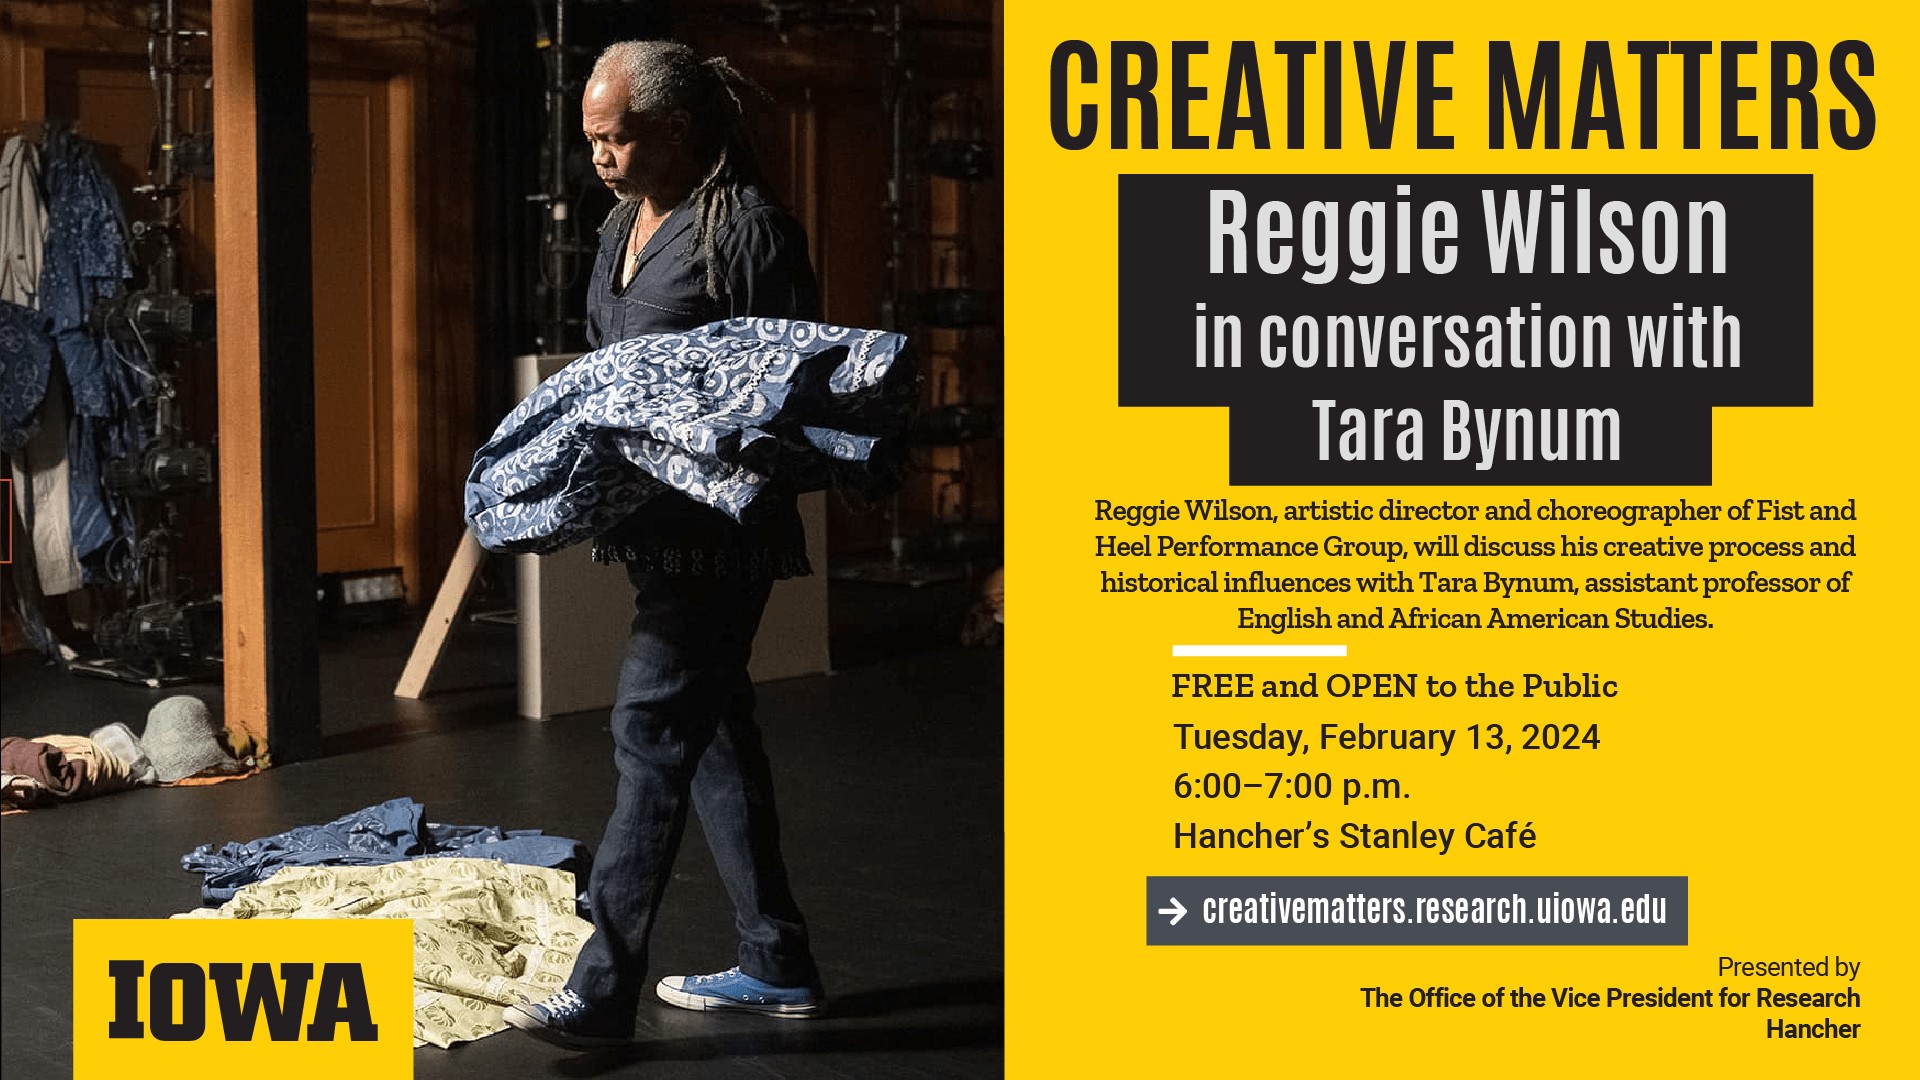 Reggie Wilson, artistic director and choreographer of Fist and Heel Performance Group, will discuss his creative process and historical influences with Tara Bynum, assistant professor of English and African American Studies.